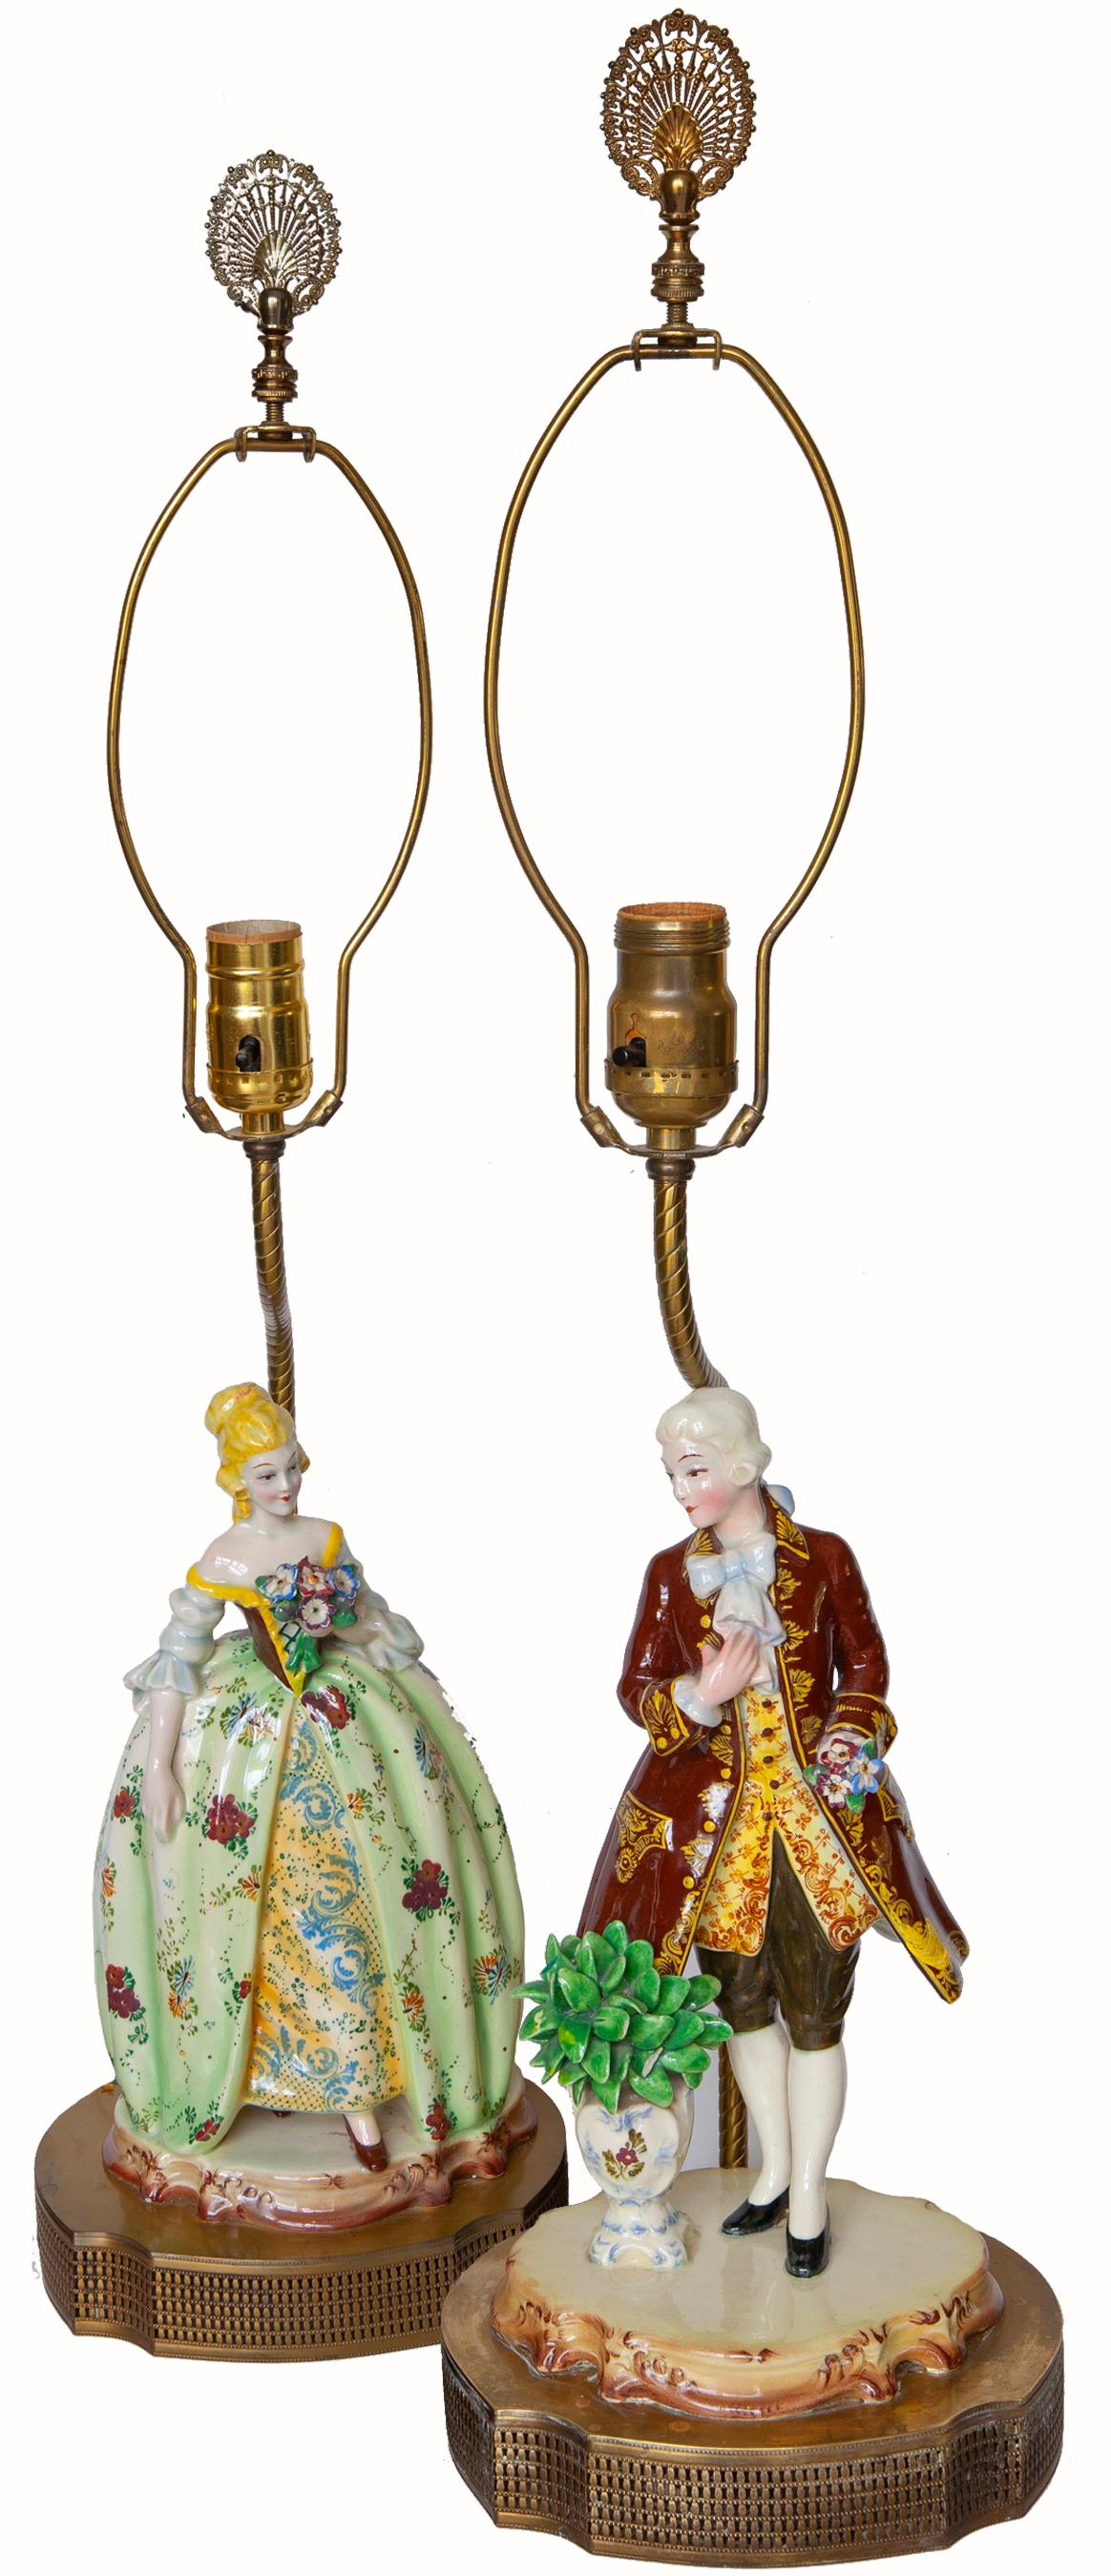 Romantic movement fine quality porcelain figurines feature Classic German attire from the late Rococo era. These figurines were fitted to pierced bases with lamp fittings around 1920-1930. Original finials & gold hardback lampshades are